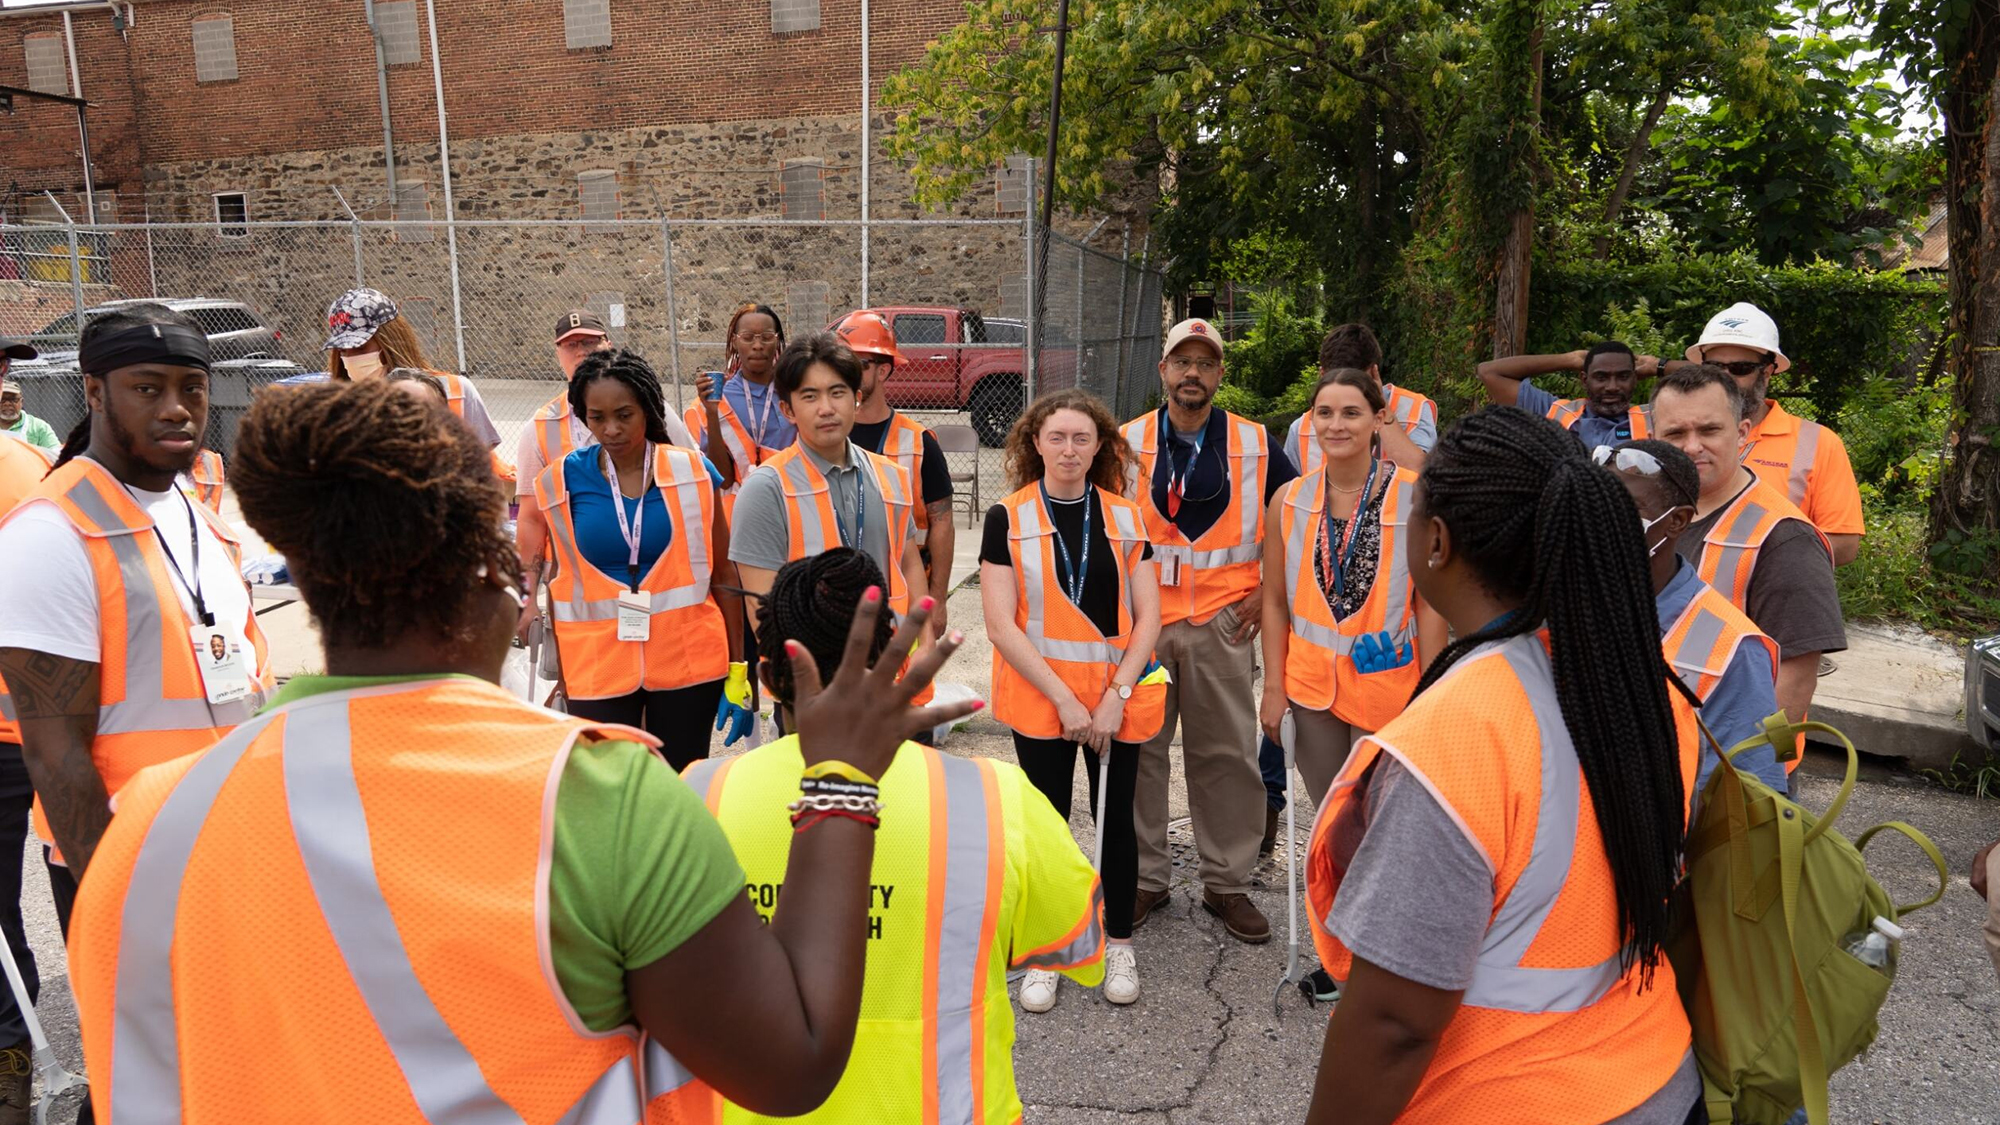 Baltimore community clean up (7.18.2022)